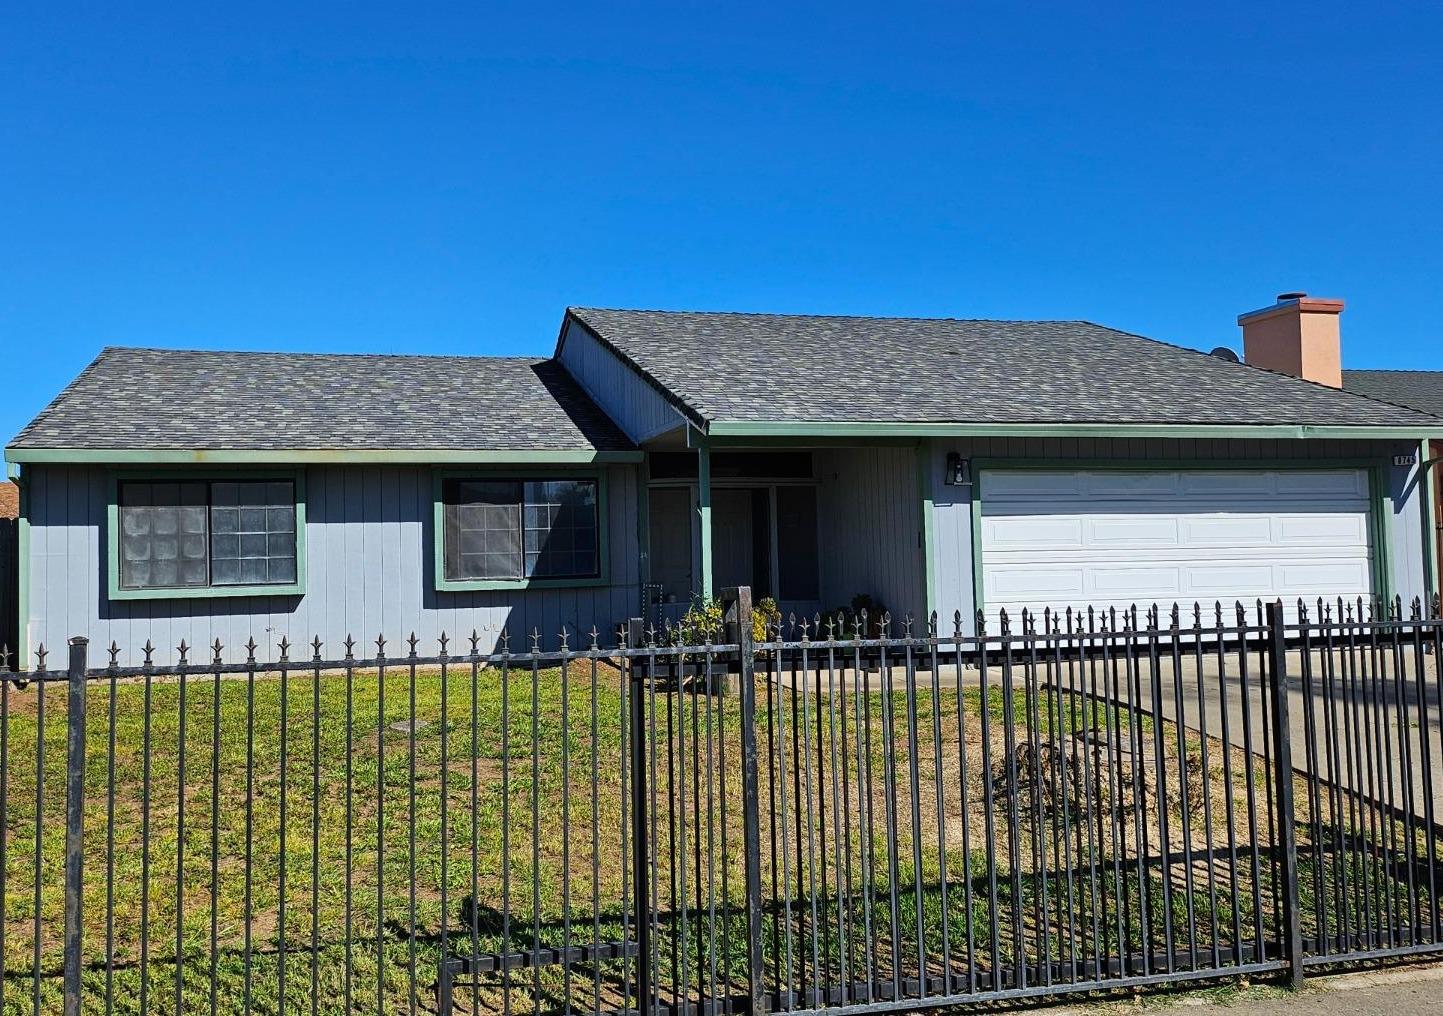 Photo of 8745 Pacific Hills Wy in Sacramento, CA